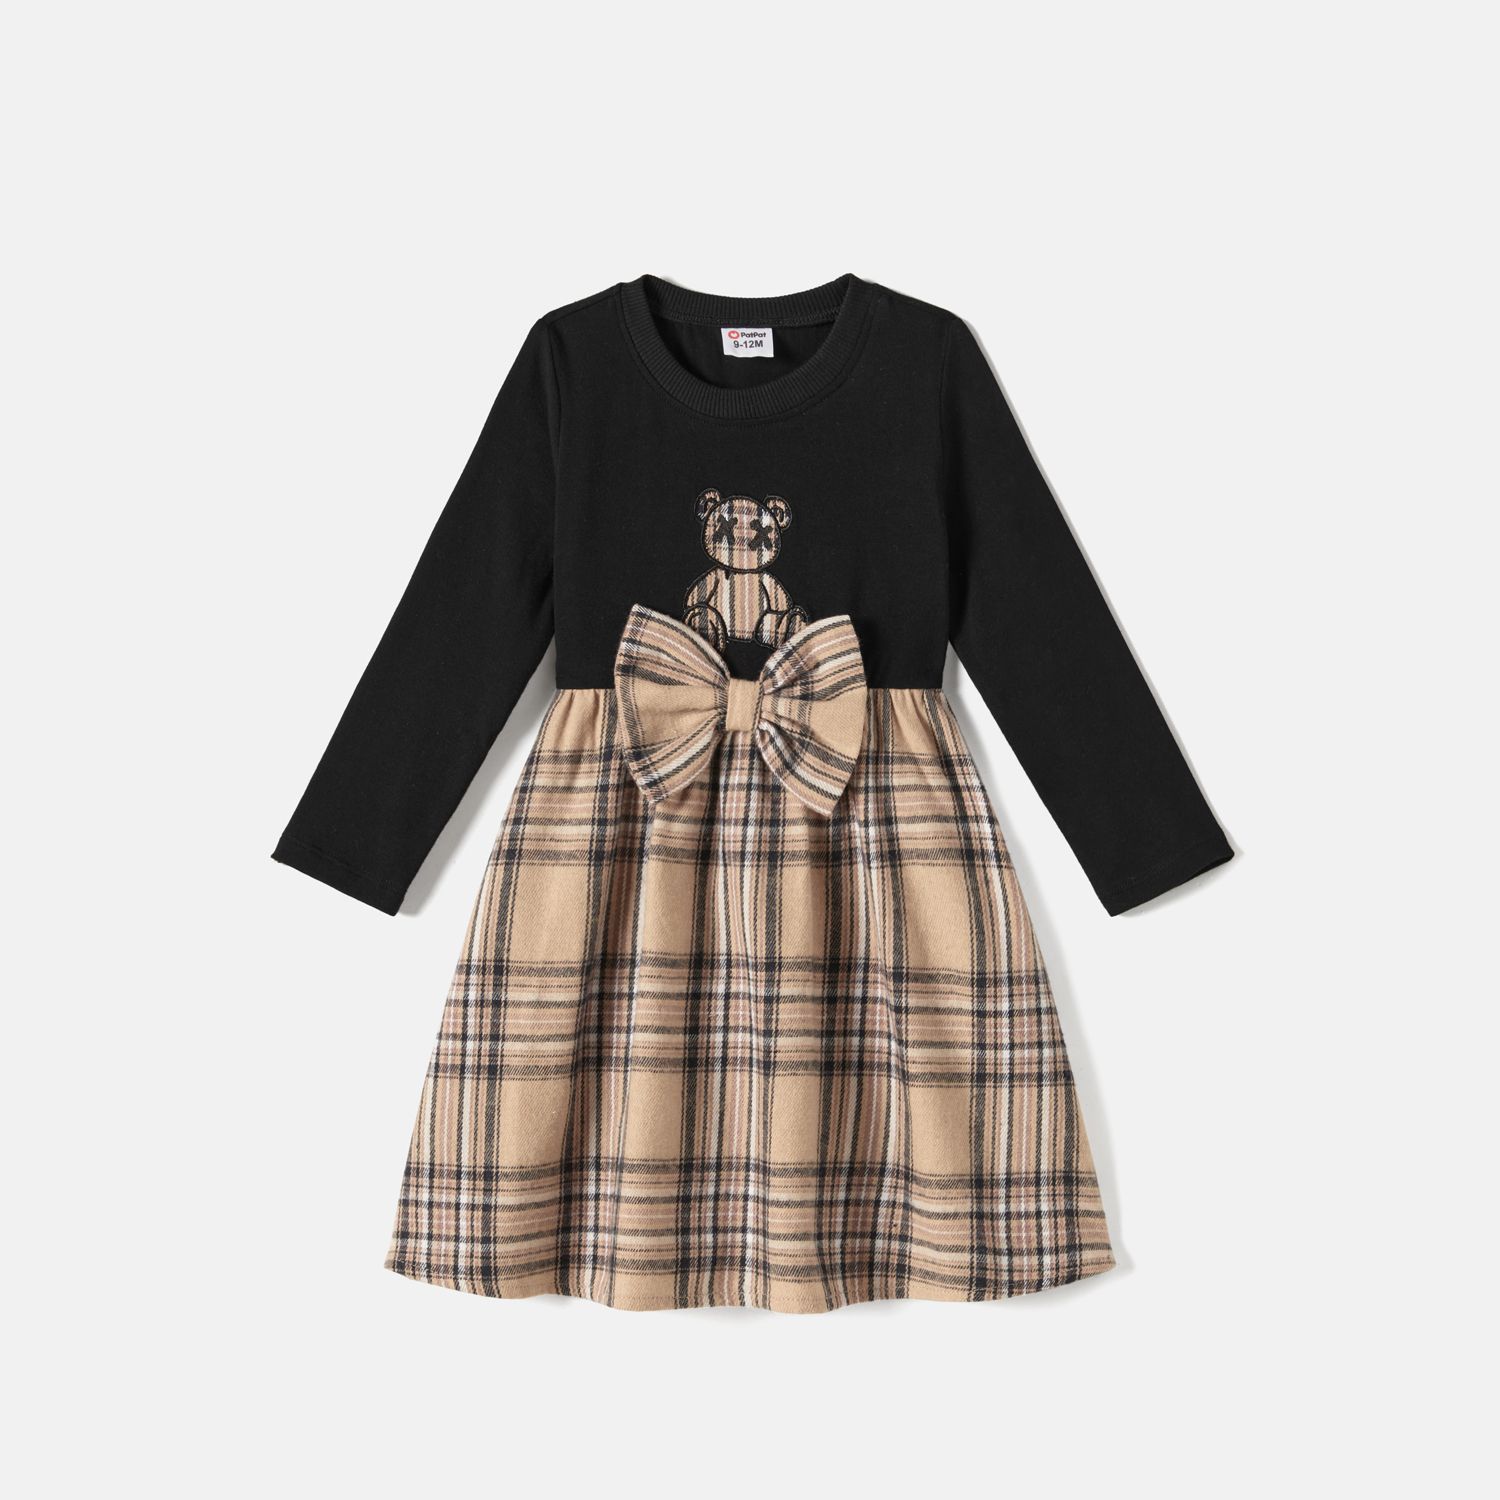 Family Look Houndstooth Grid Bear Print Long Sleeve Tops And Dresses Sets